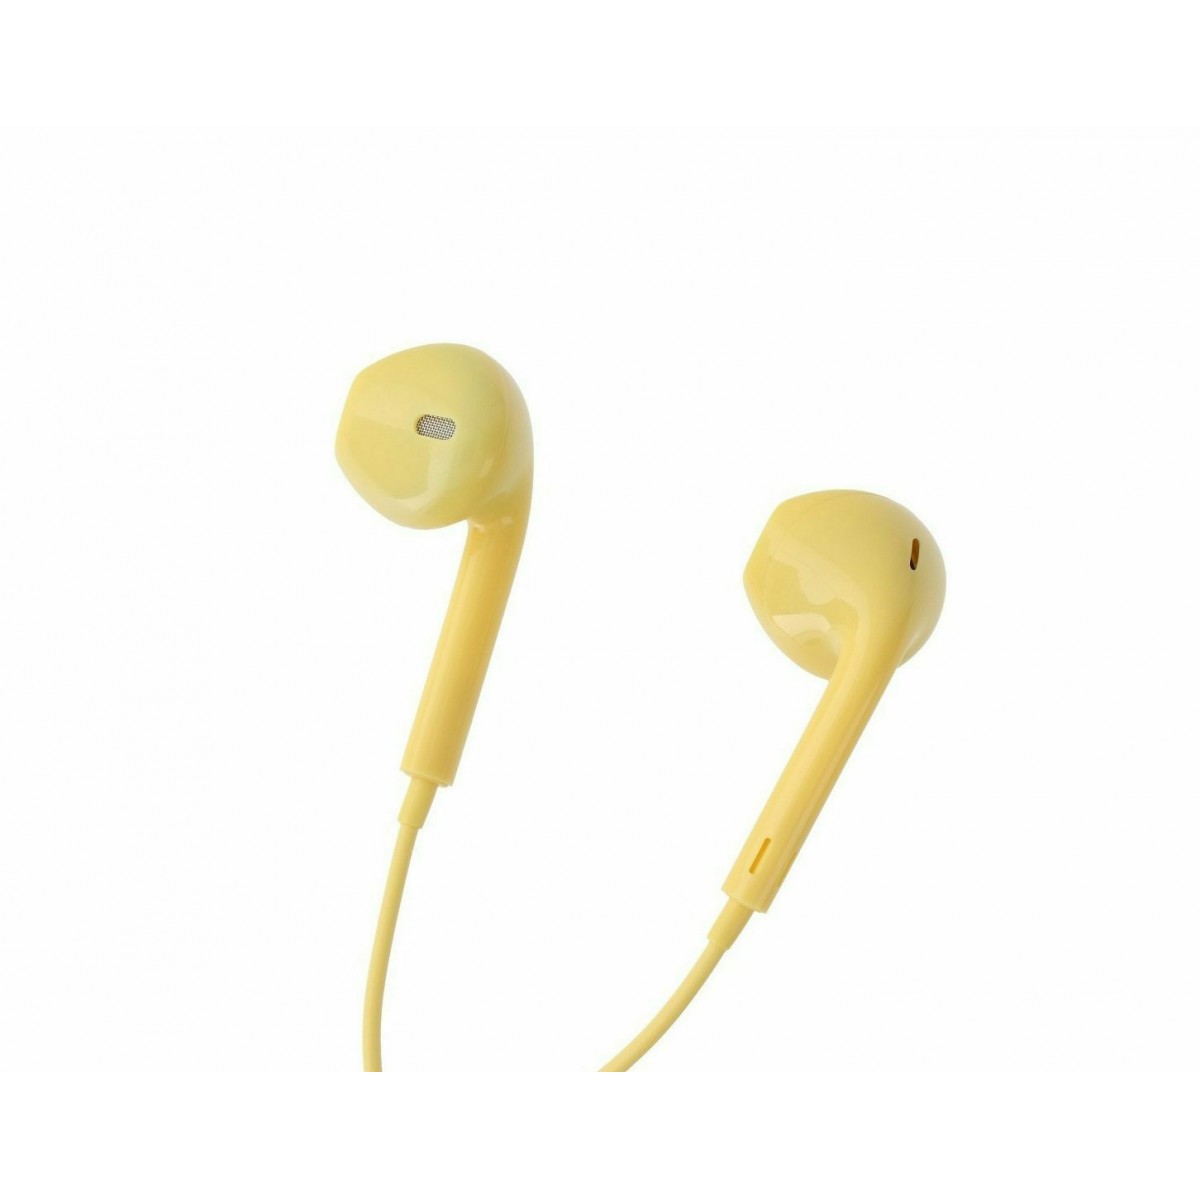 HANDSFREE WIRED WITH MICRO JACK 3.5mm PA-E65 YELLOW